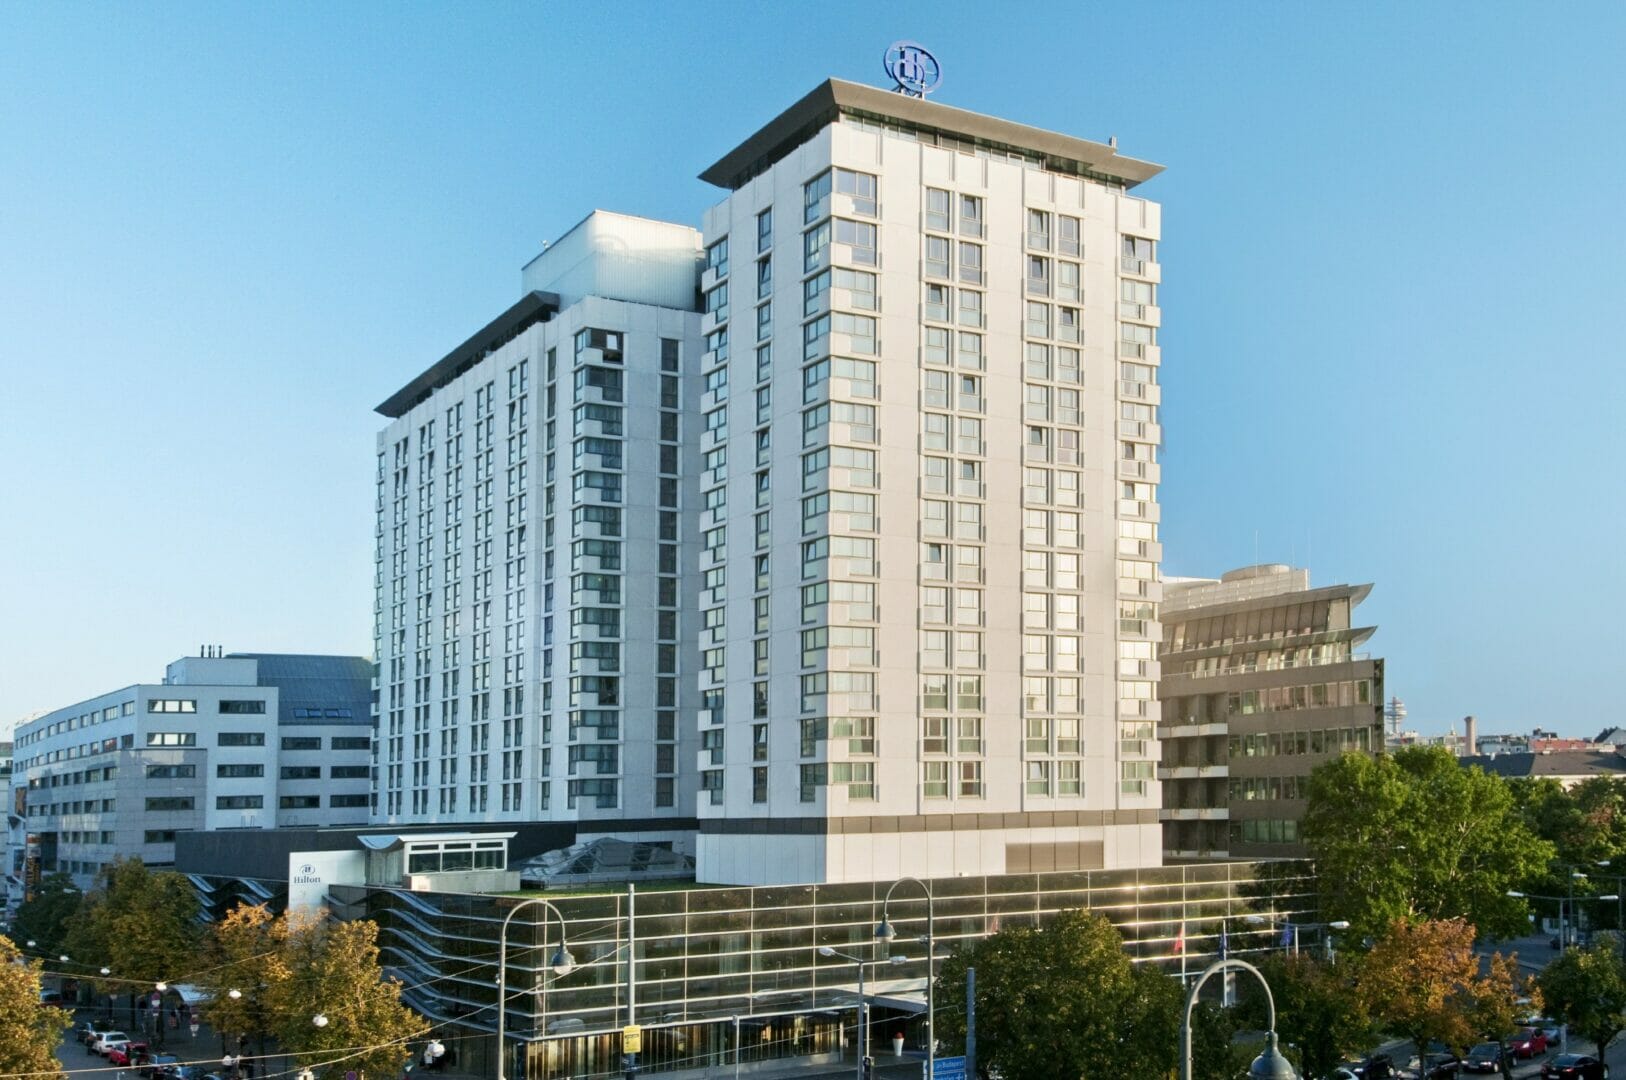 HILTON VIENNA PARK – EUROPE’S LARGEST DOWNTOWN FULL-SERVICE MEETING & EVENT HOTEL